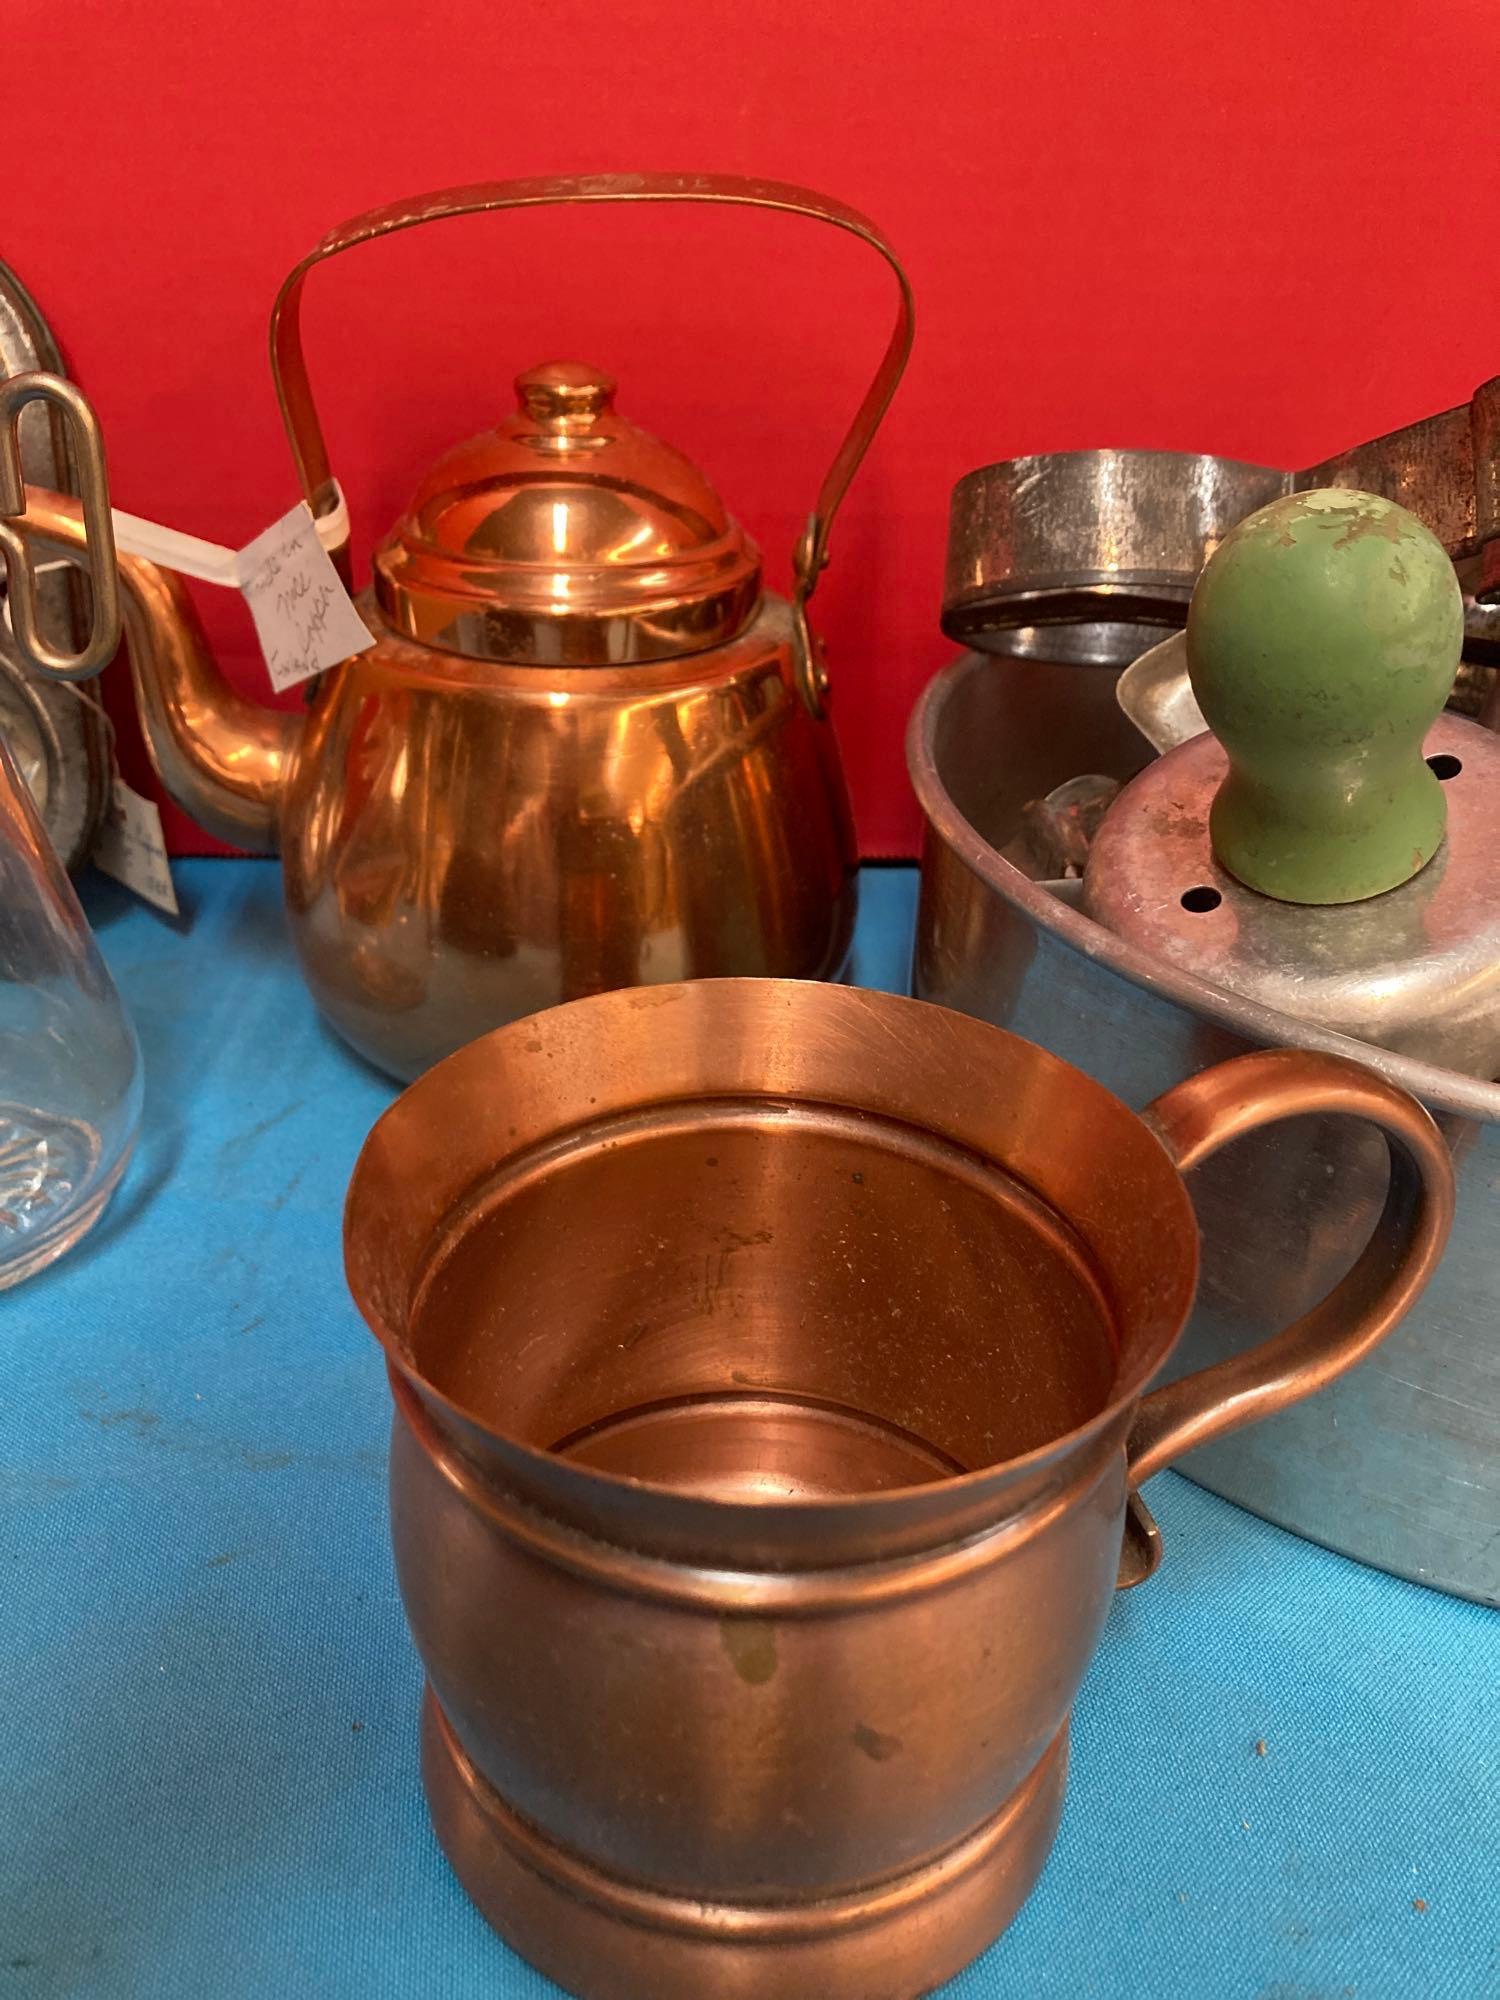 Vintage kitchen items, cookie cutters, molds, copper tea kettle, and more